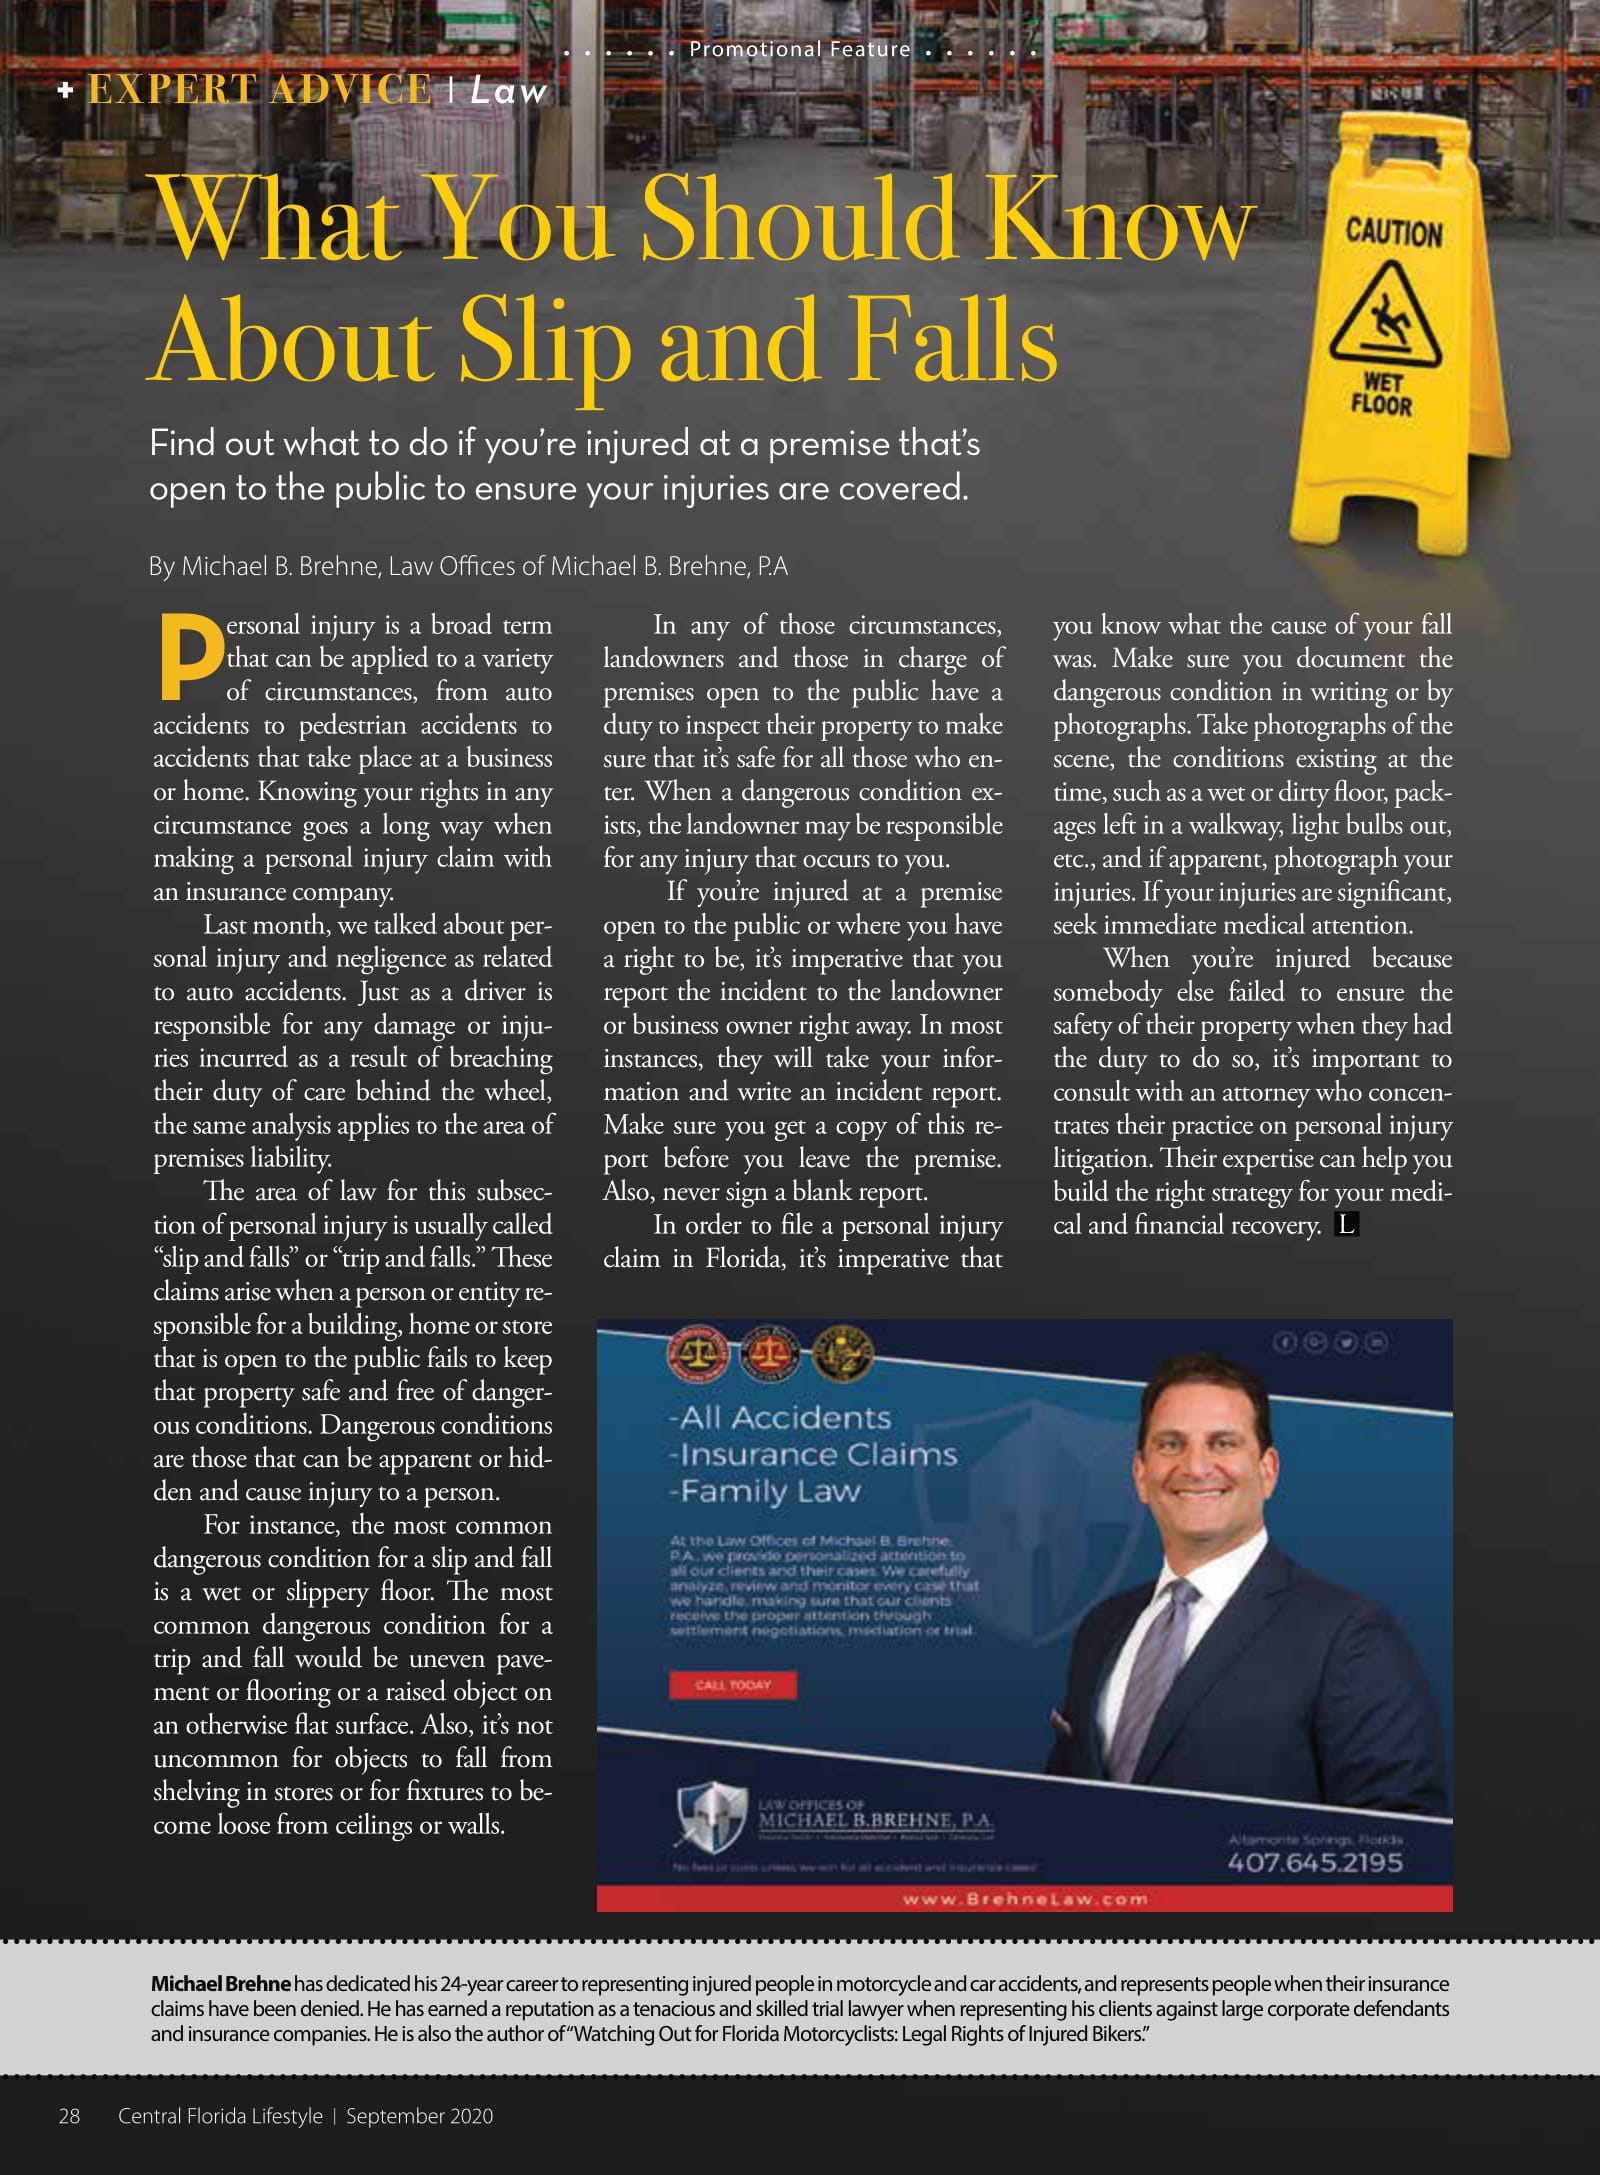 What You Should Know About Slip & Falls